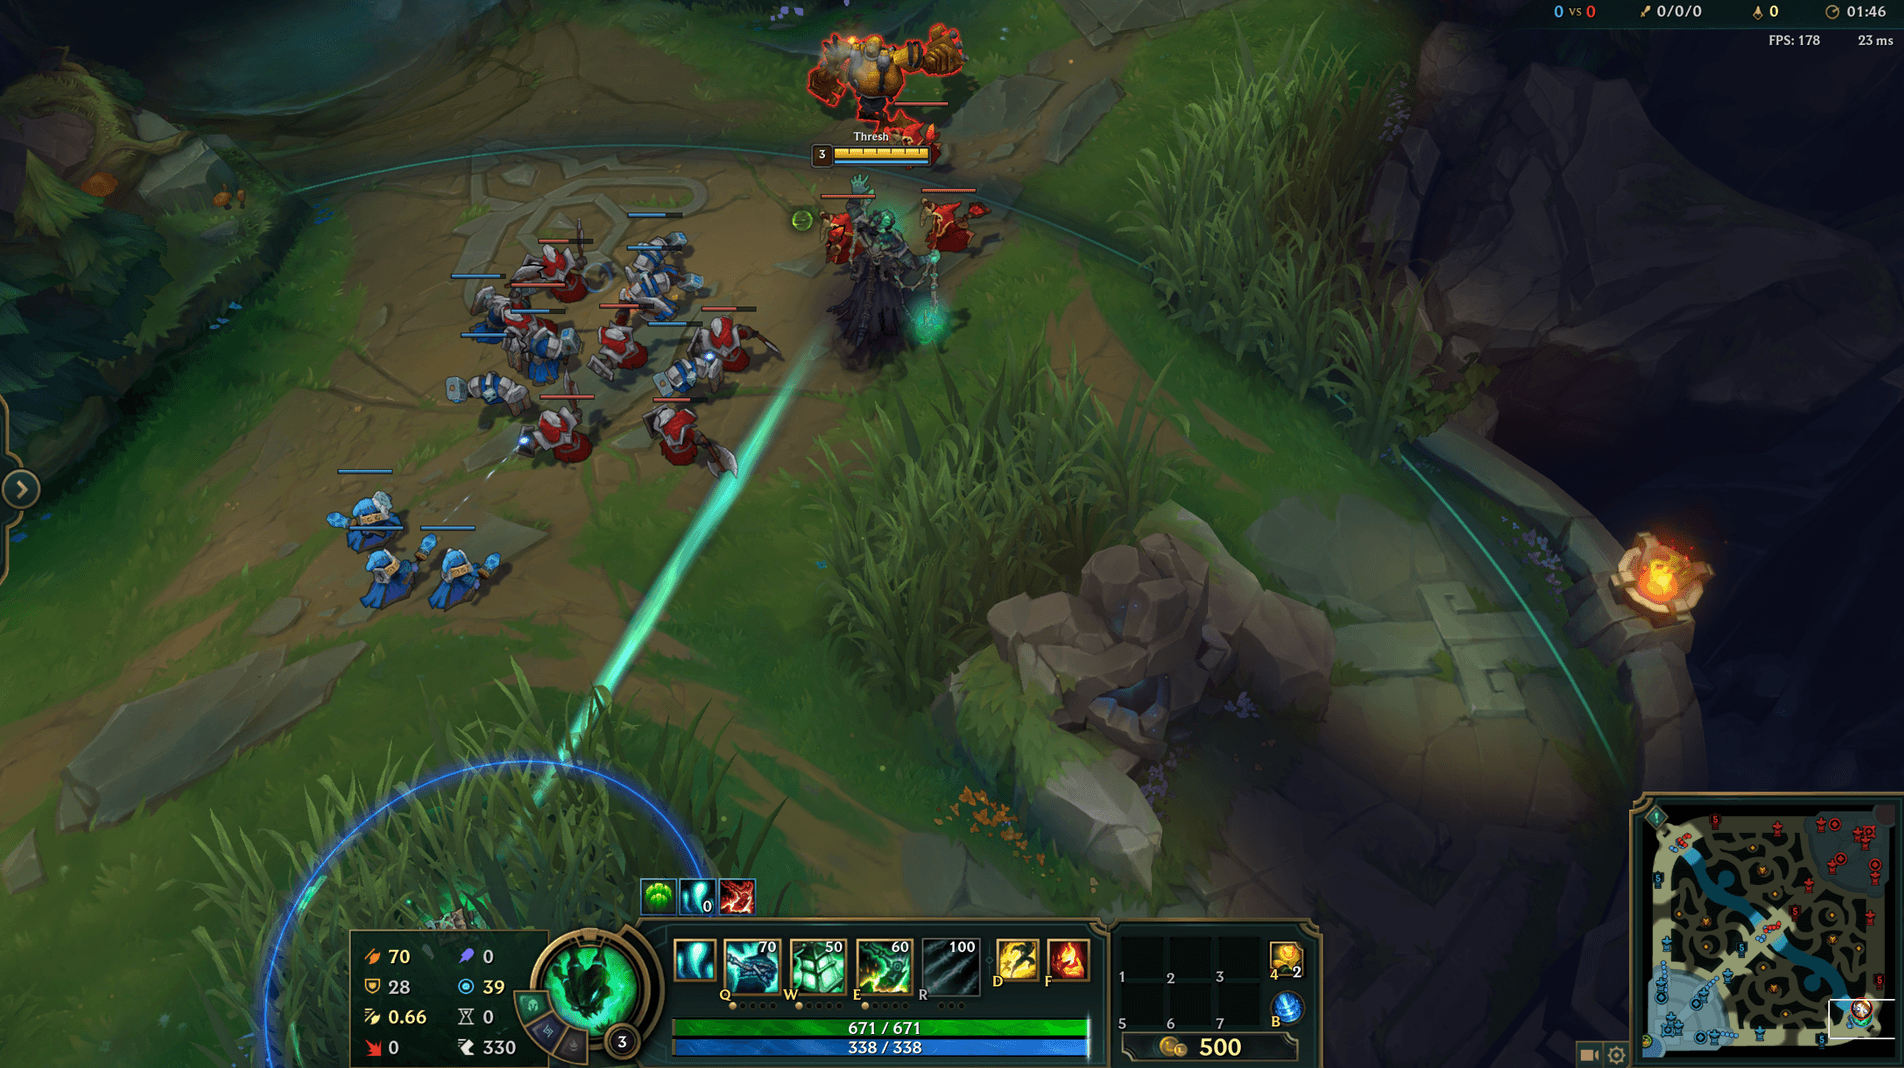 A good trick for Thresh is to use his lantern as bait to confuse enemies and make them think someone else is about to gank from a bush